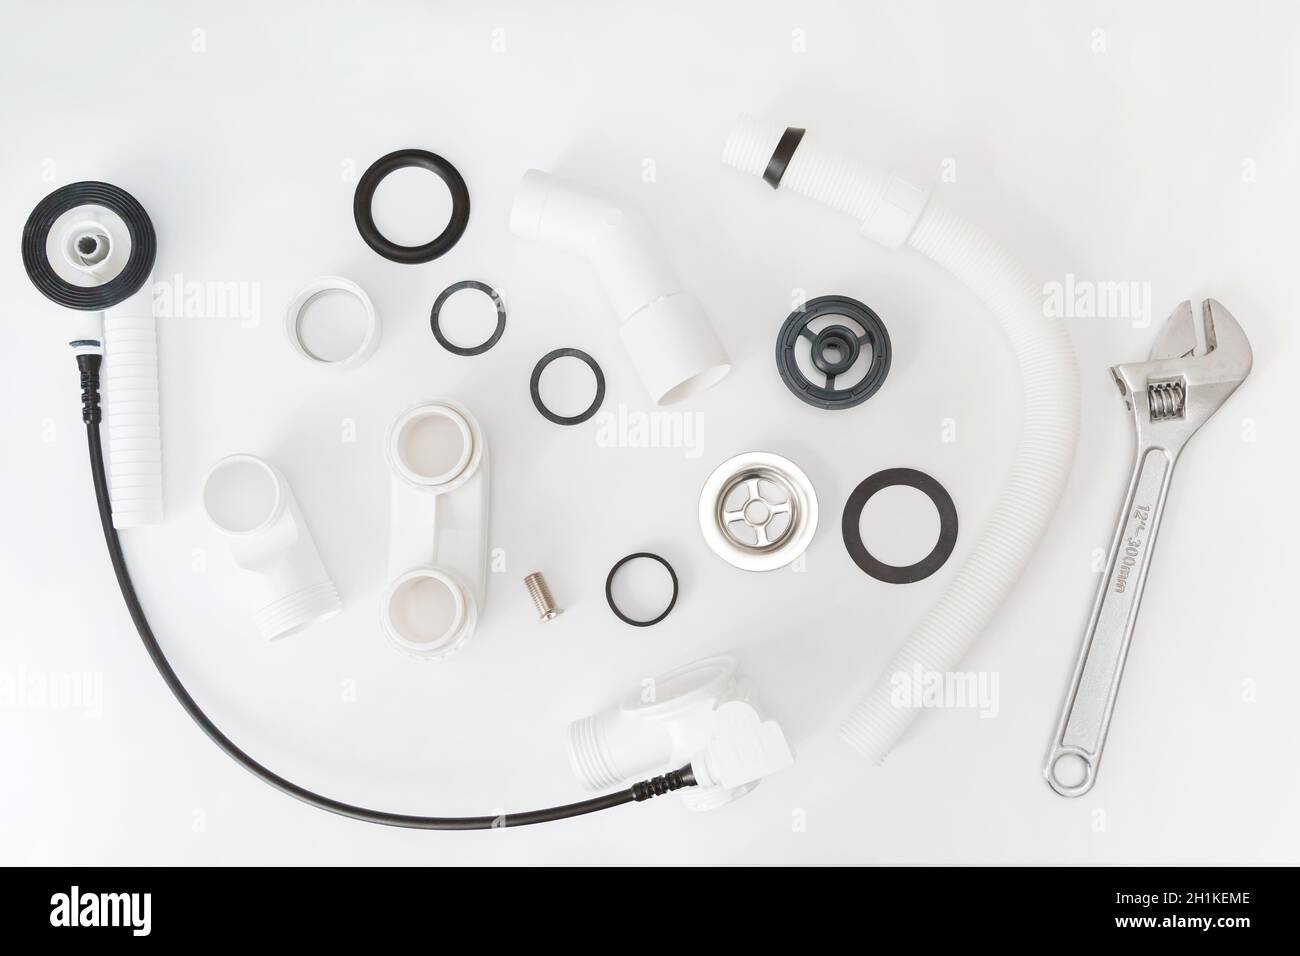 Details plastic siphon kit for bathtub on a white background. Plumbing knolling on white background. Stock Photo